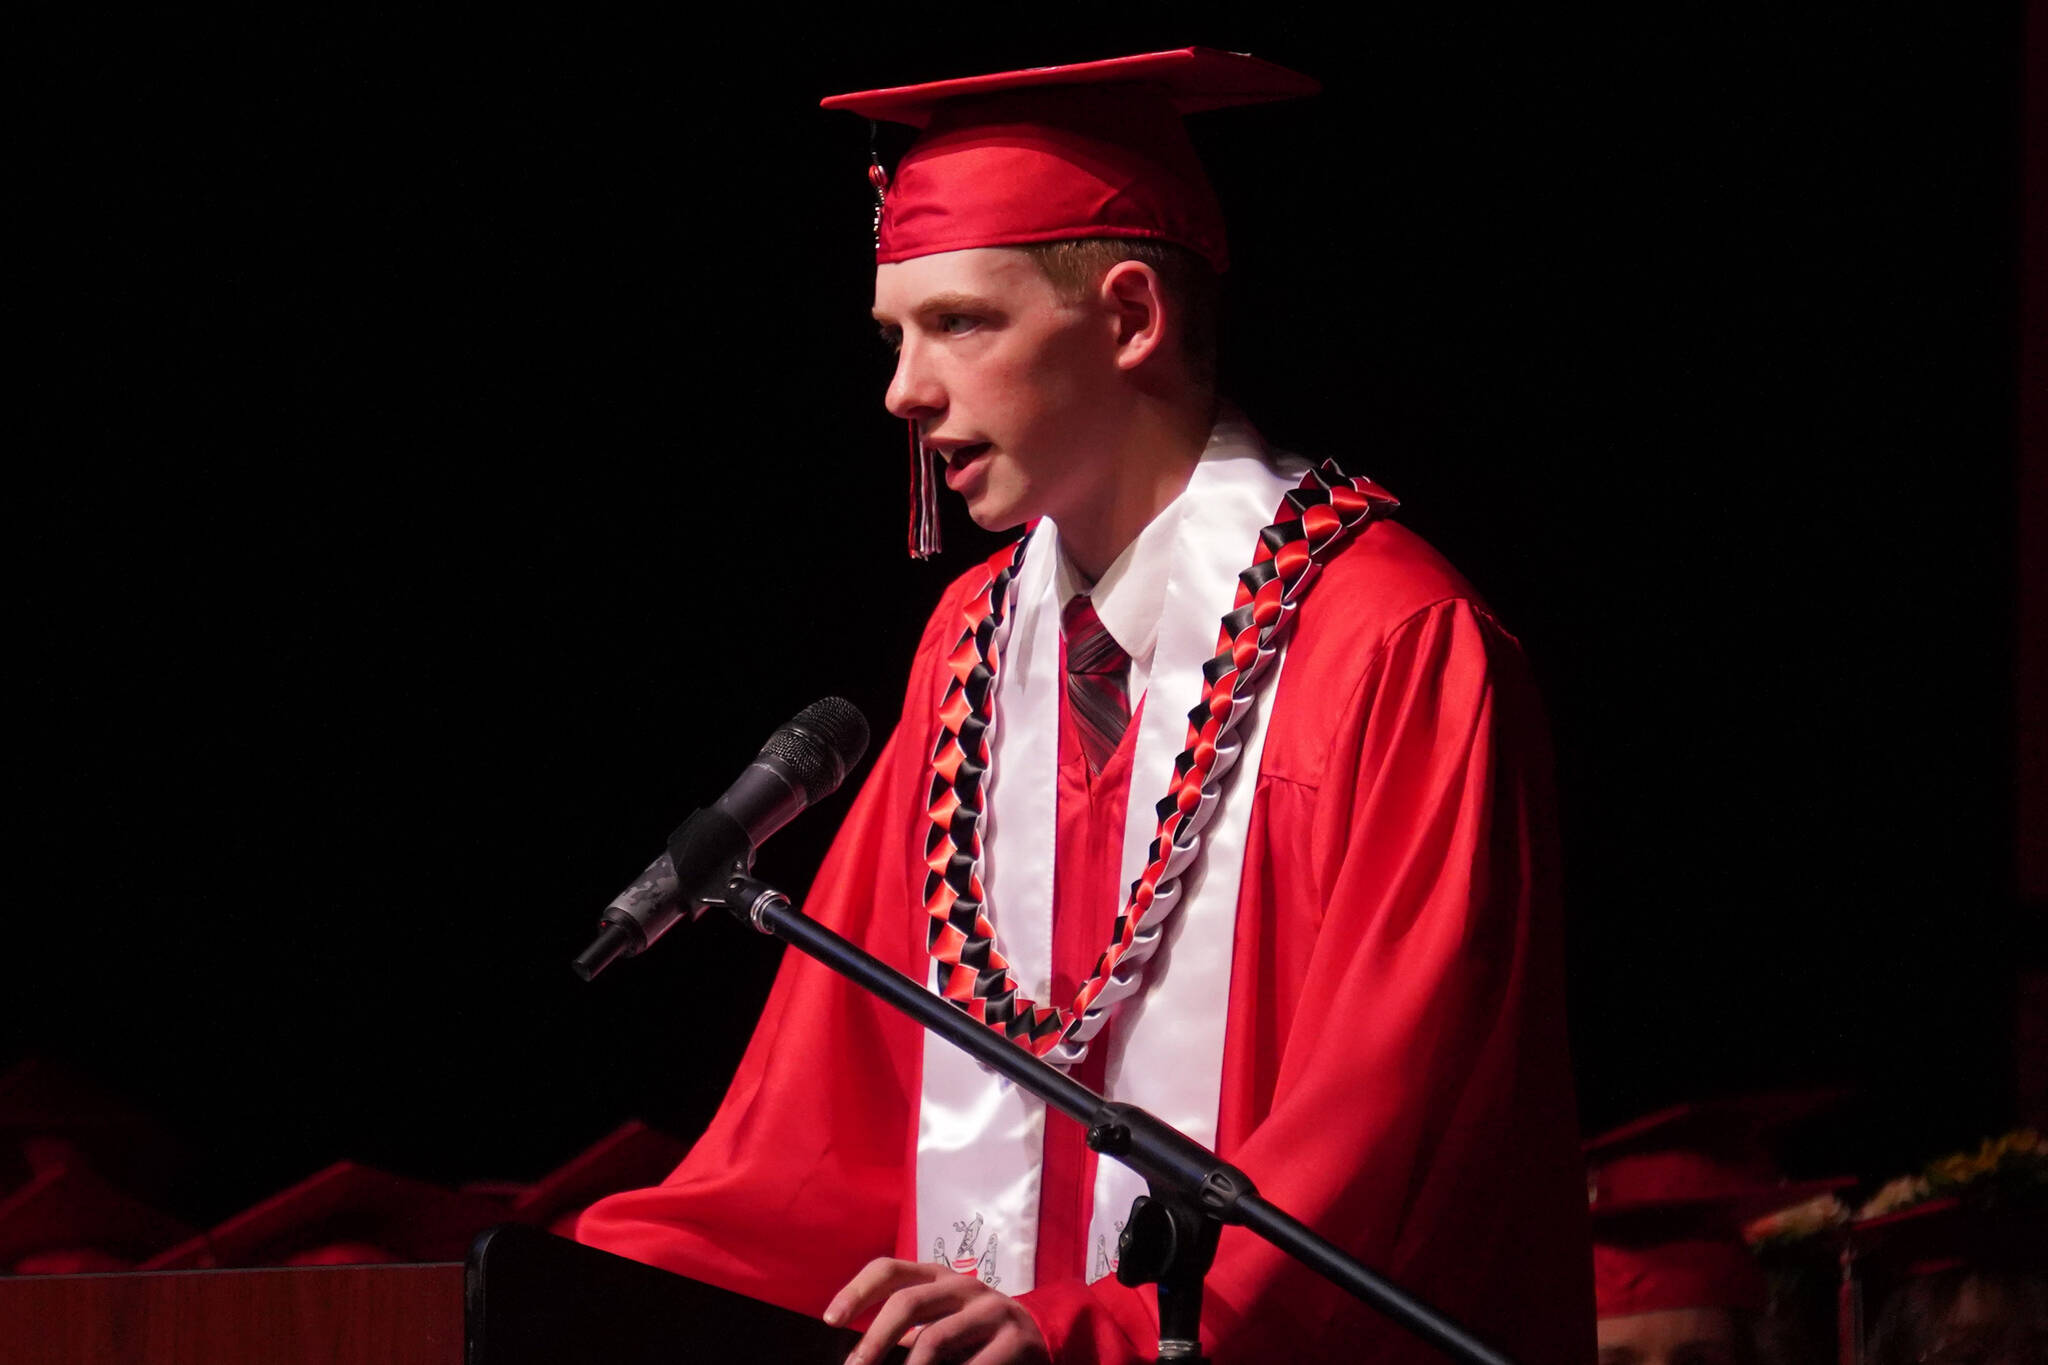 Senior Class Speaker Irving “Roc” Riggle addresses the Kenai Central High School Class of 2023 during a graduation ceremony on Wednesday, May 17, 2023, at Kenai Central High School in Kenai, Alaska. (Jake Dye/Peninsula Clarion)